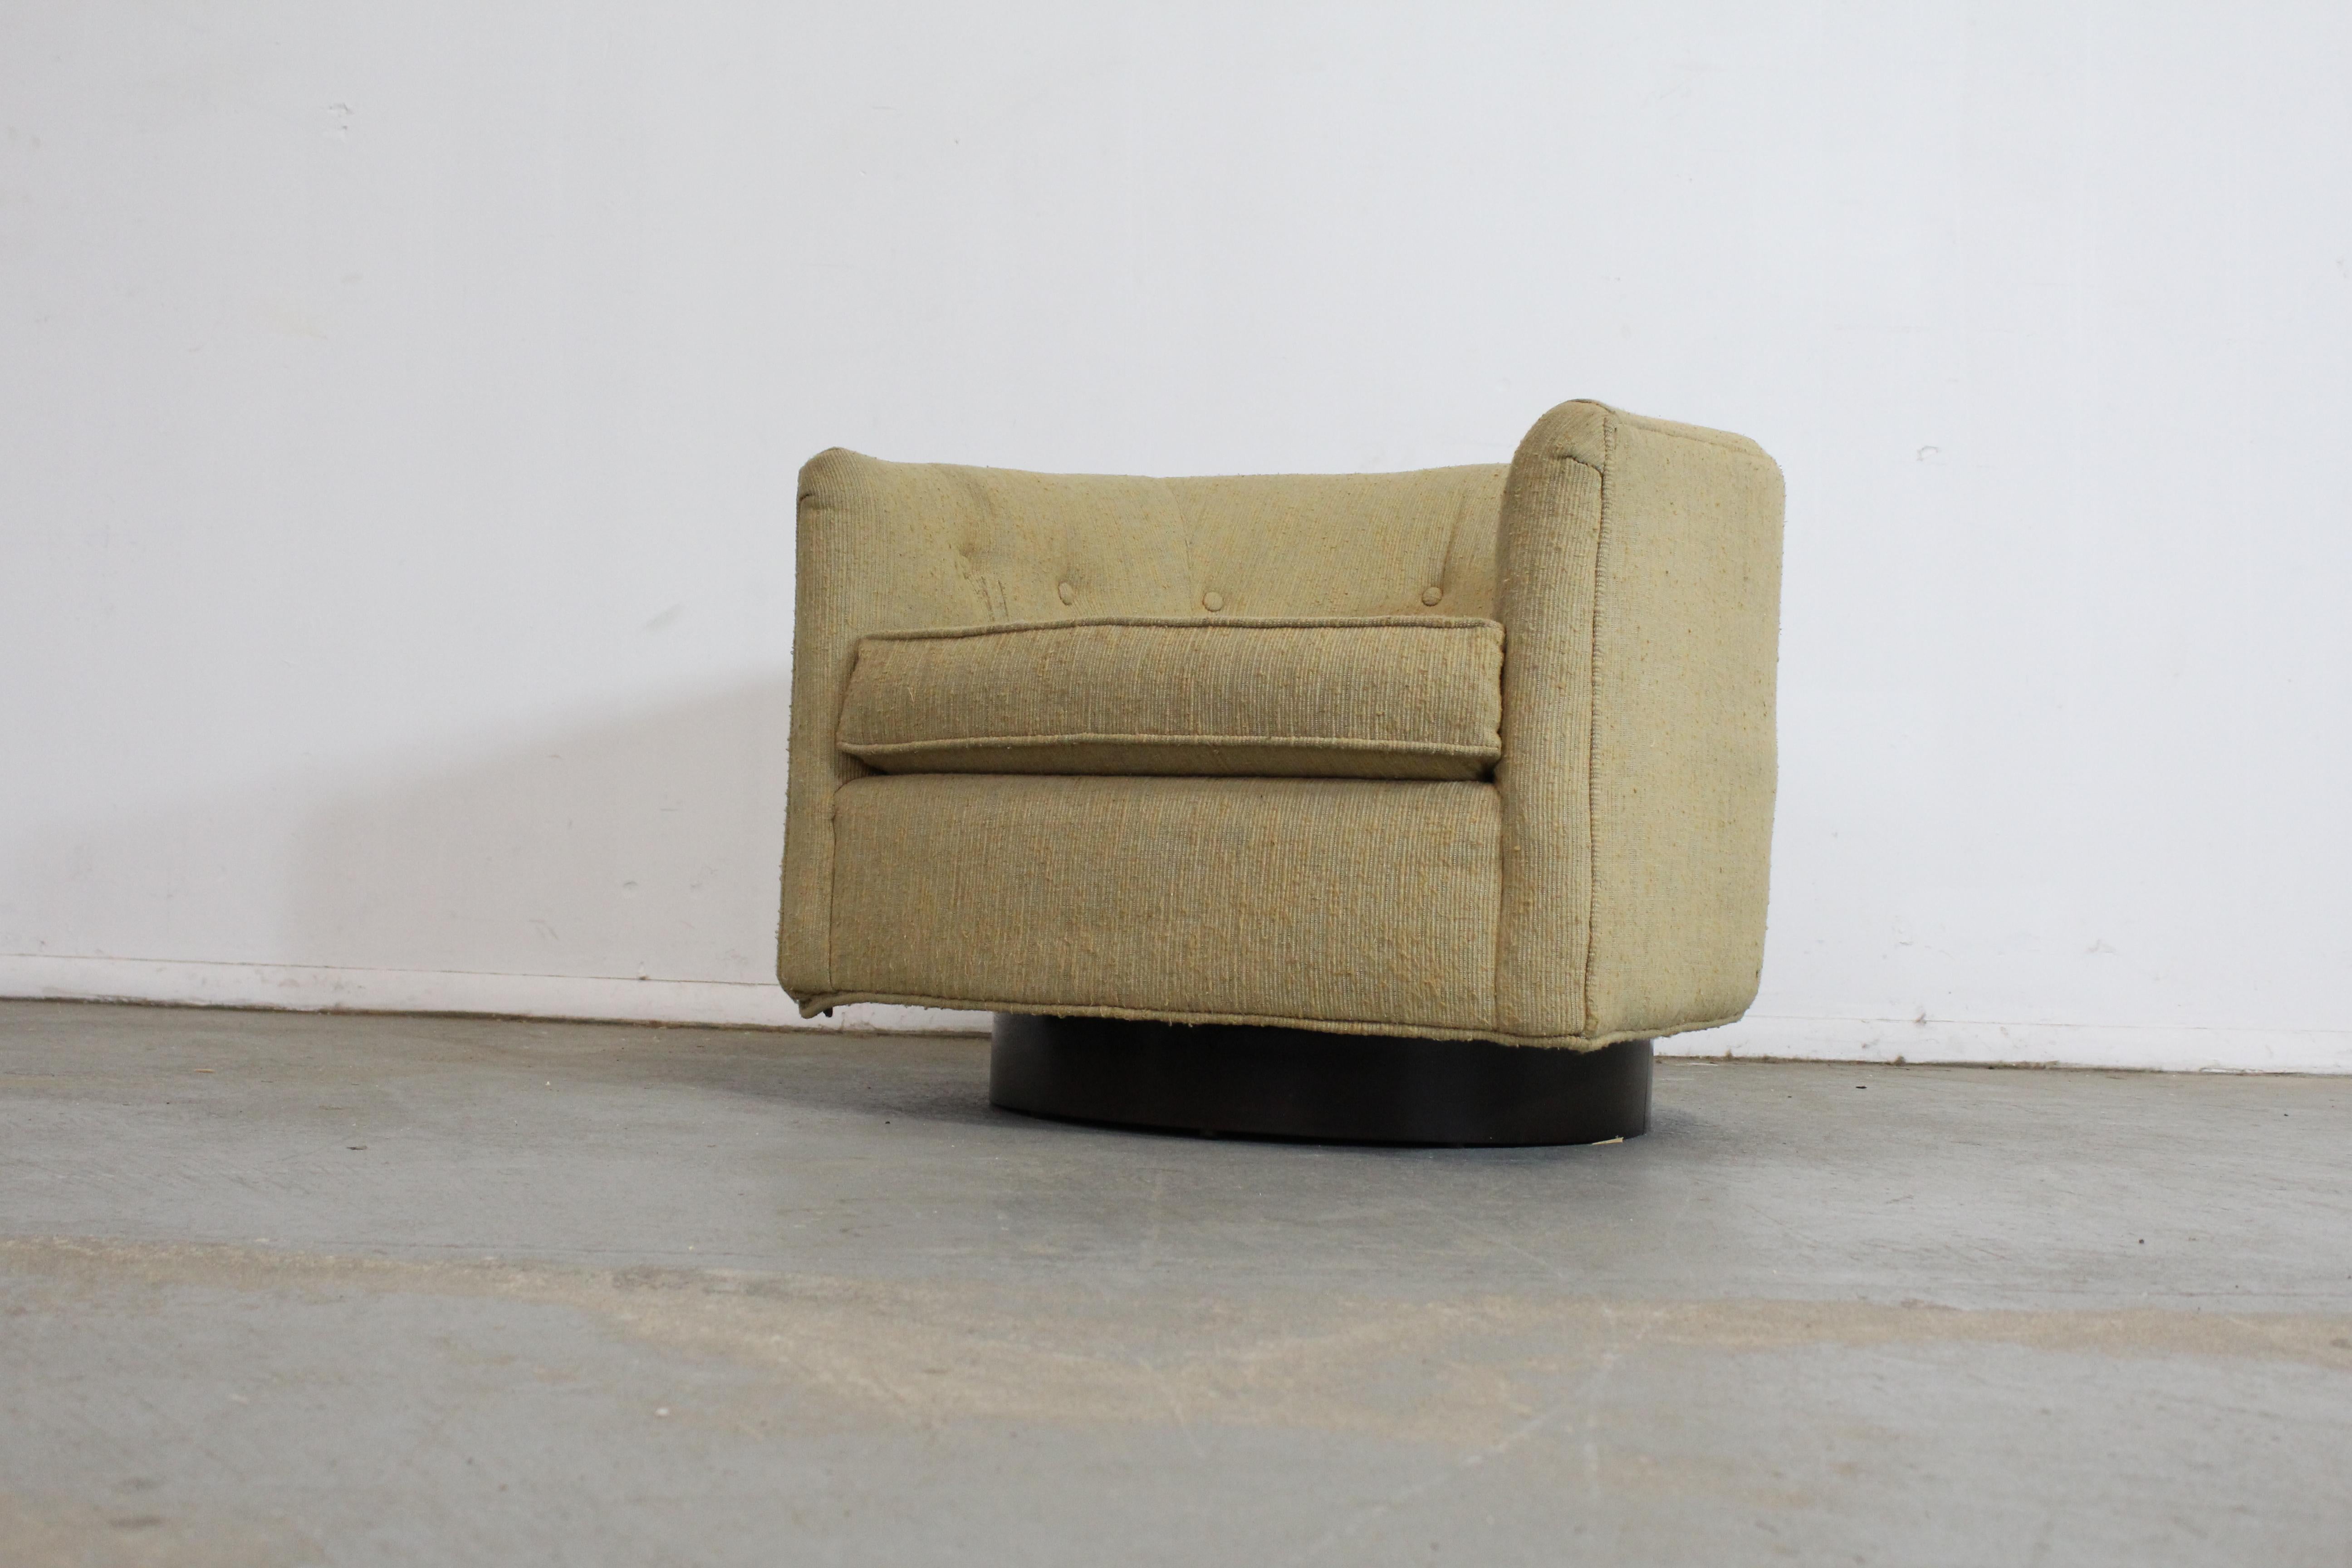 What a find. Offered is a Mid-Century Modern barrel-back swivel chair by Bernhardt. The chair is in the style of Milo Baughman. Has a wooden base, tufted back, swivels and rocks. It is in good condition some scuff marks on the base. Upholstery needs